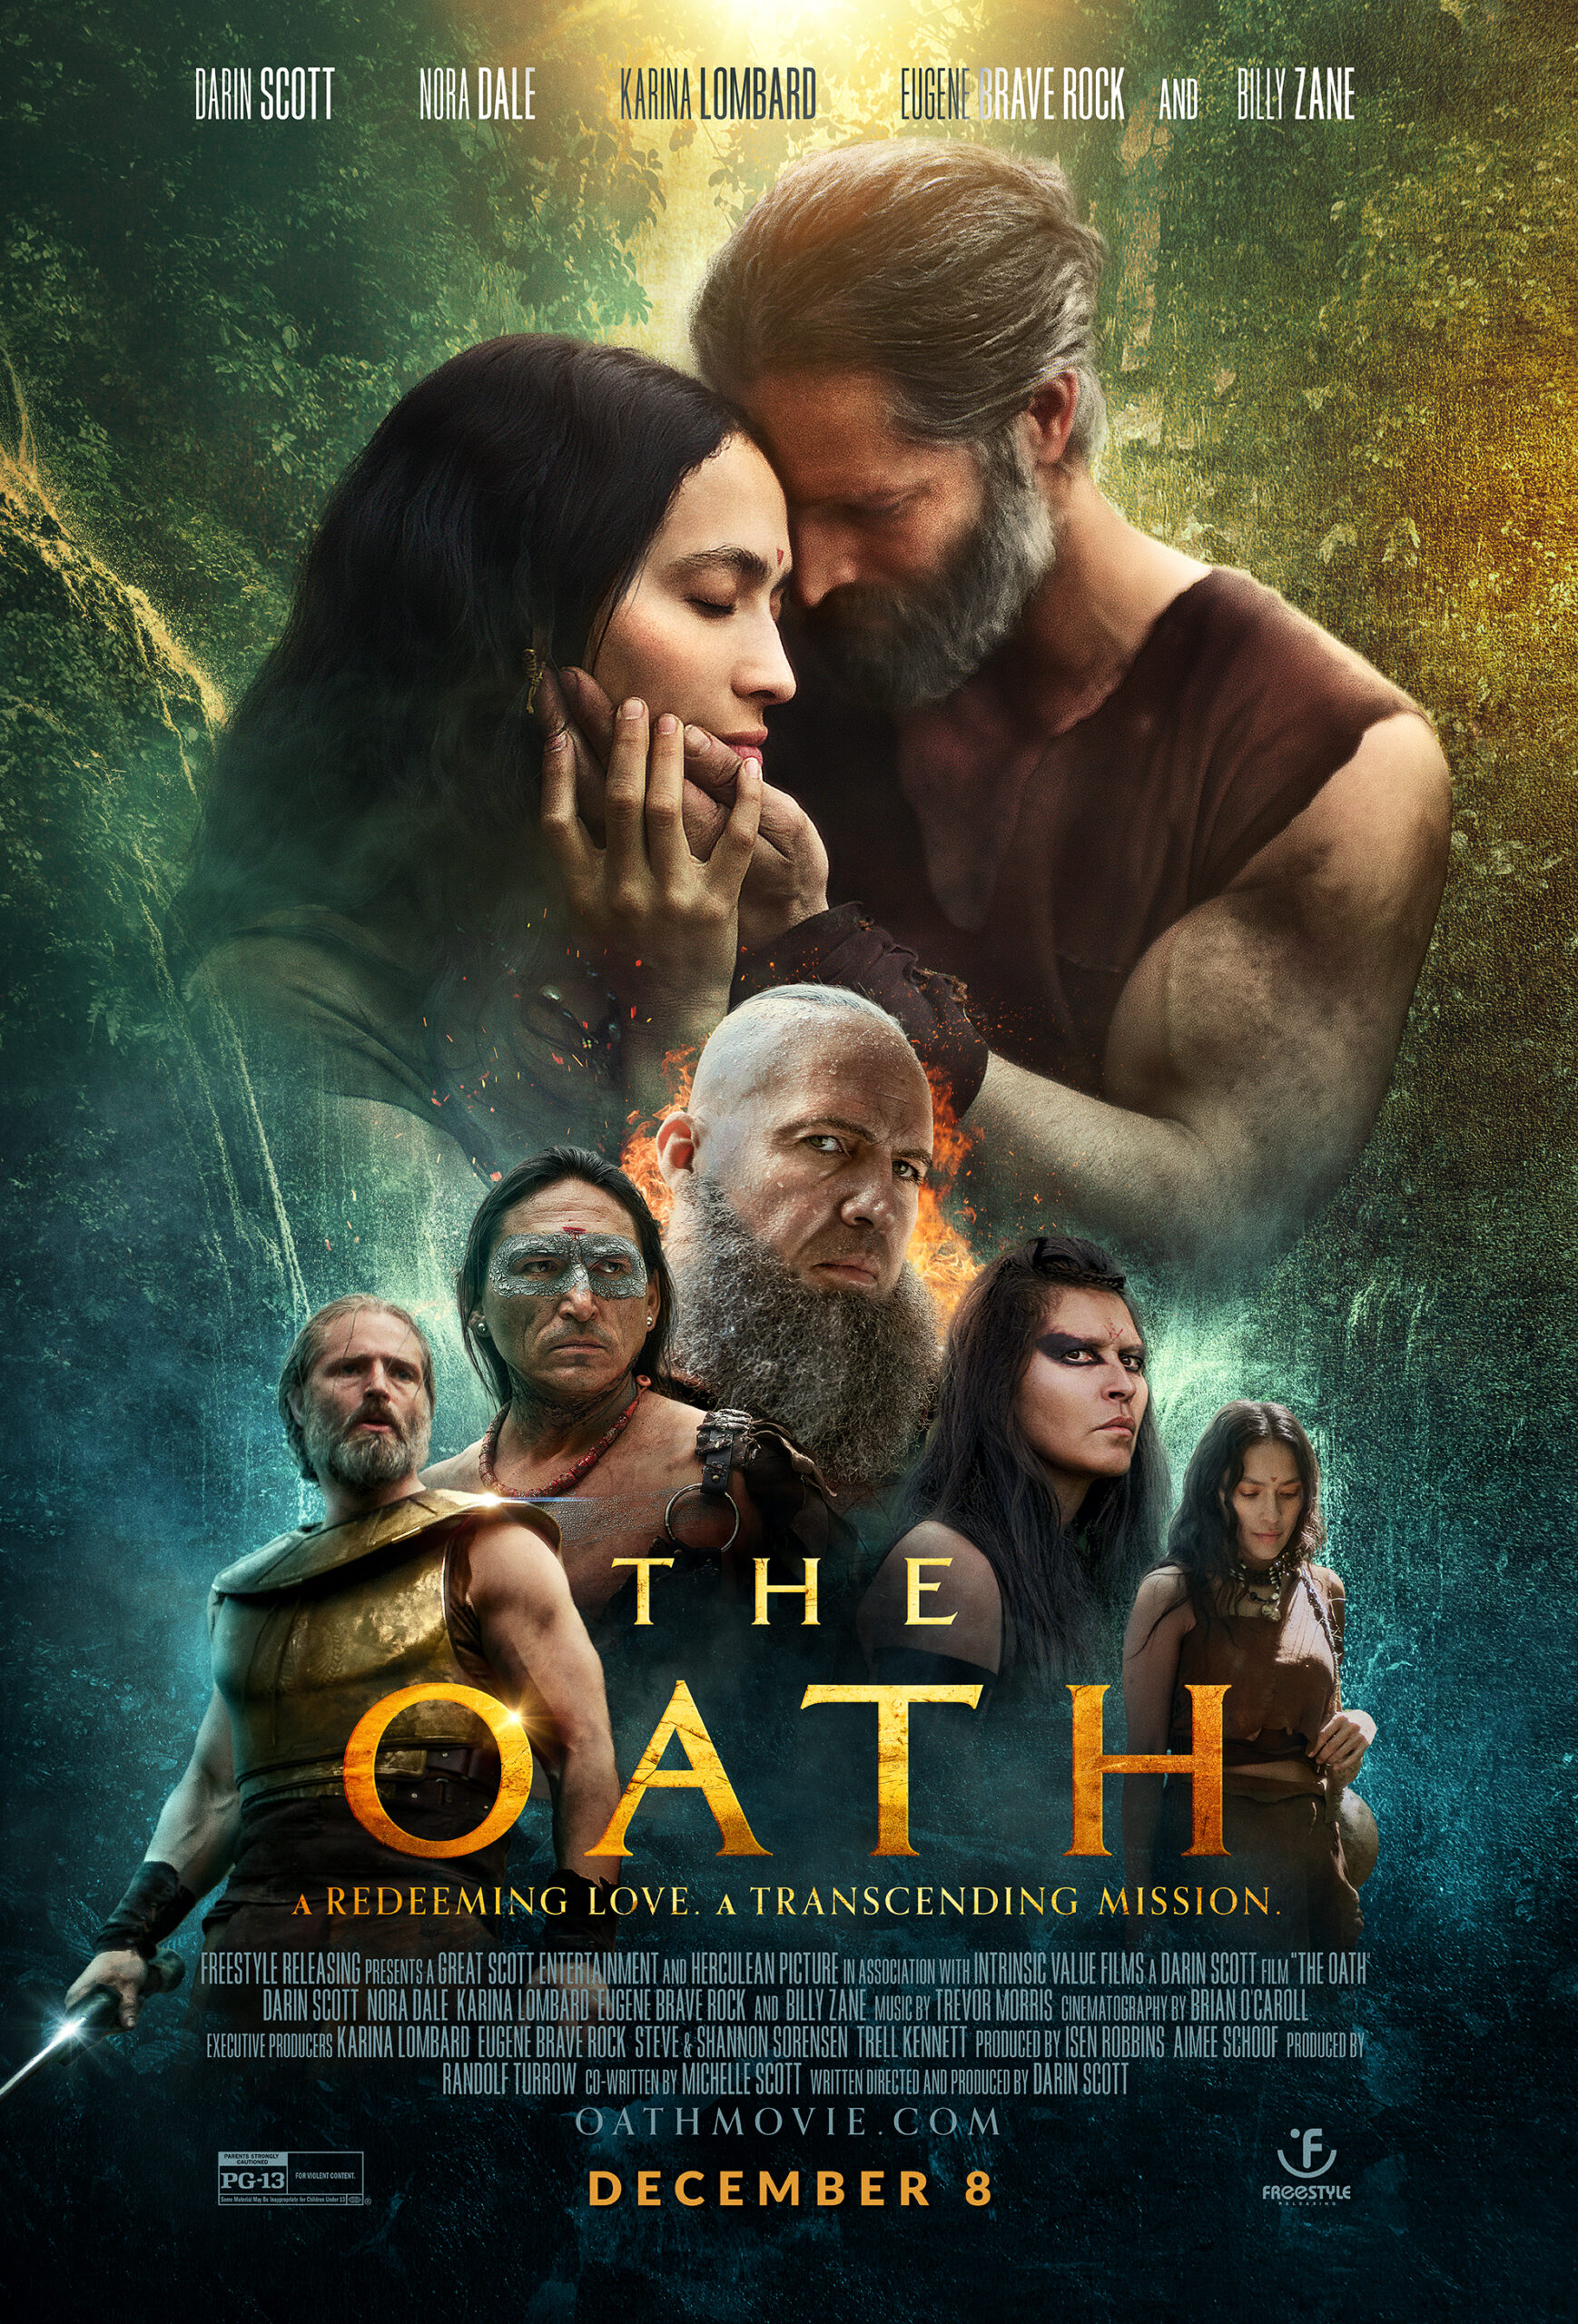 The Oath, New Action Movies At The Theatres